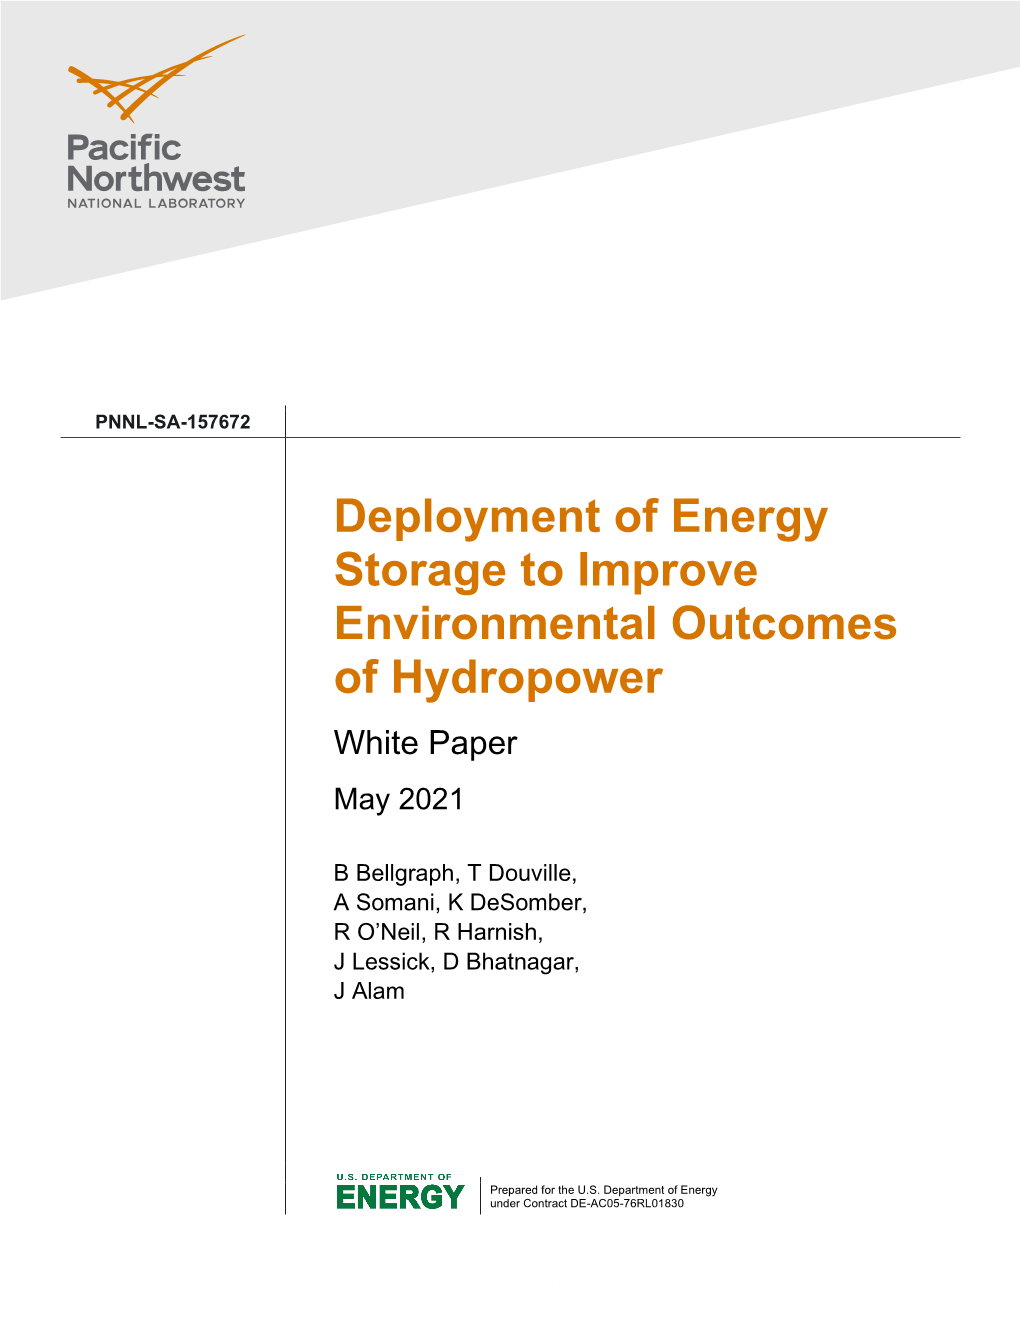 Deployment of Energy Storage to Improve Environmental Outcomes of Hydropower White Paper May 2021